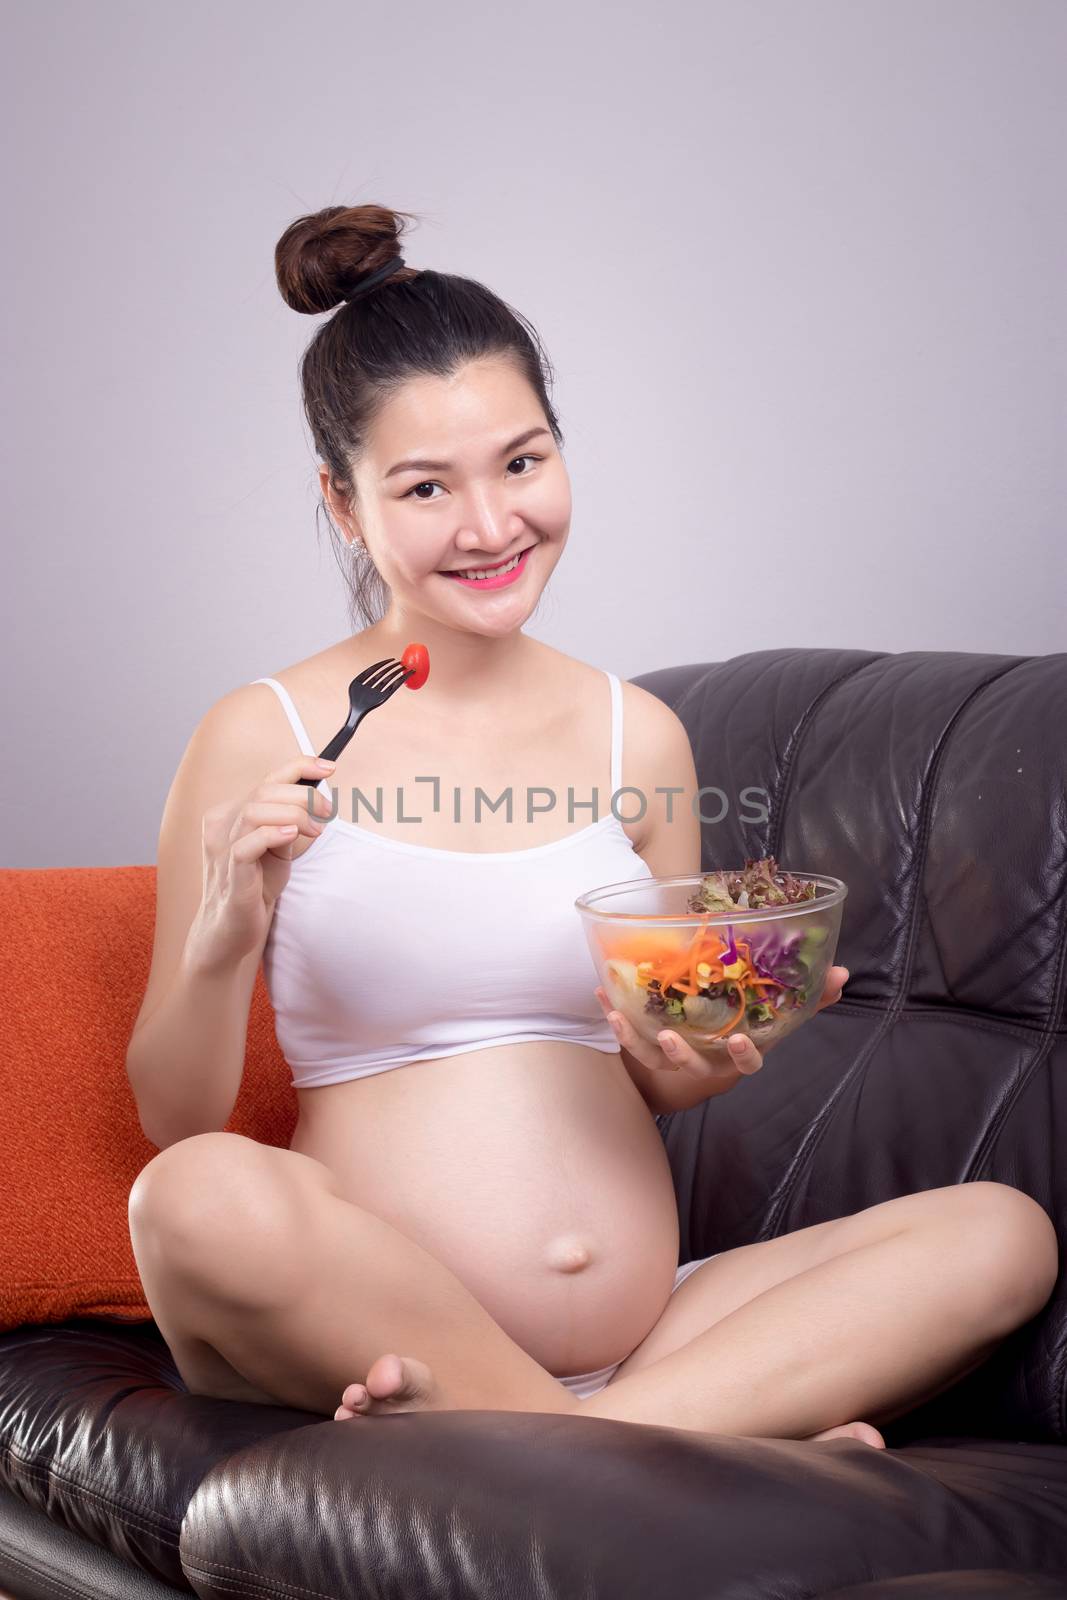 Pregnant nutrition healthy concept. Happy young beautiful Asian pregnant woman eat salad from salad bowl on sofa with smiley face. Health care with relax at home.Beautiful Asia female model in her 20s by asiandelight